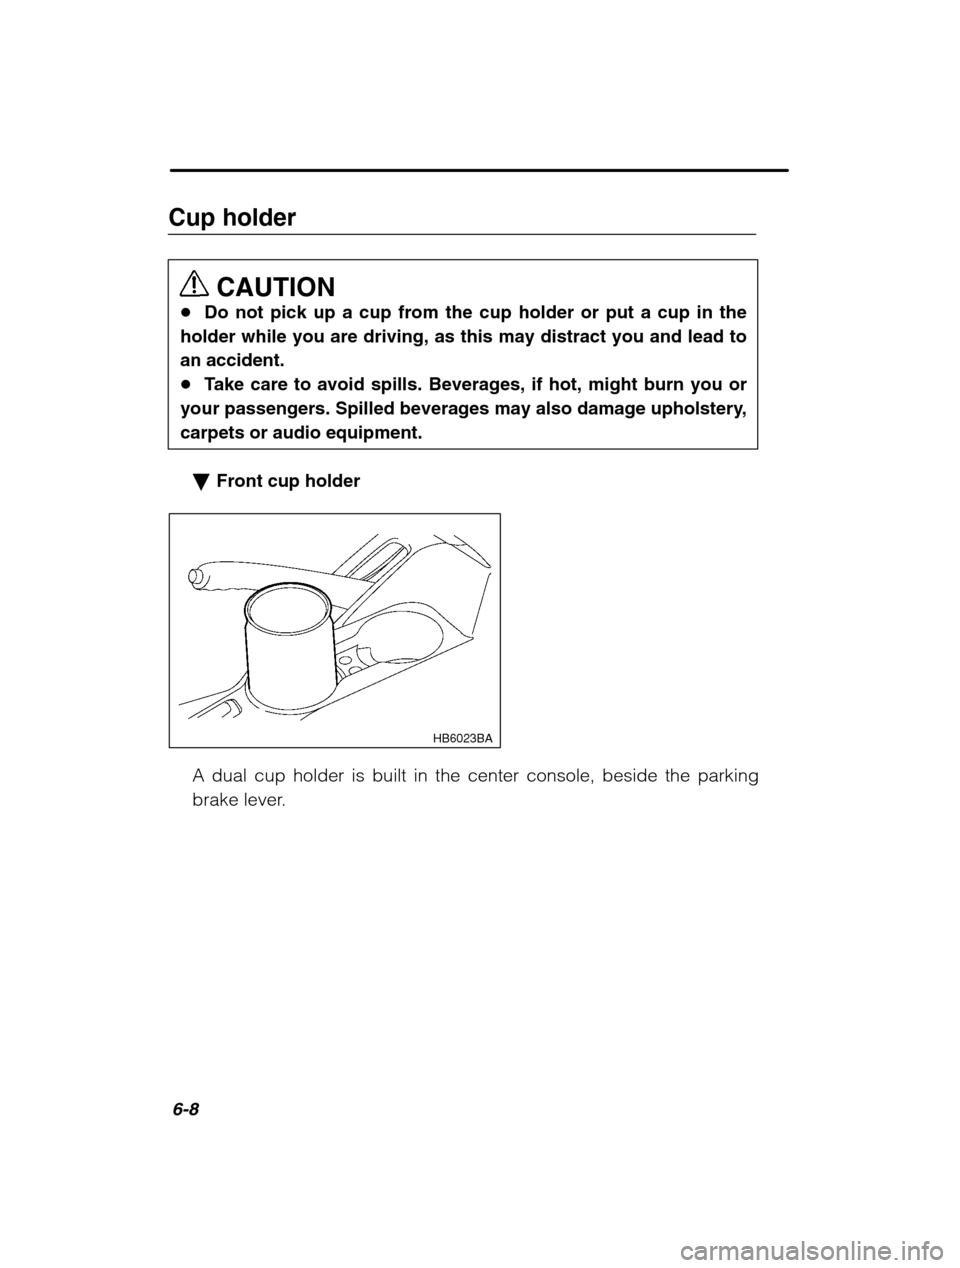 SUBARU OUTBACK 2002 3.G Owners Manual 6-8
Cup holderCAUTION
� Do not pick up a cup from the cup holder or put a cup in the
holder while you are driving, as this may distract you and lead to an accident.� Take care to avoid spills. Beverag